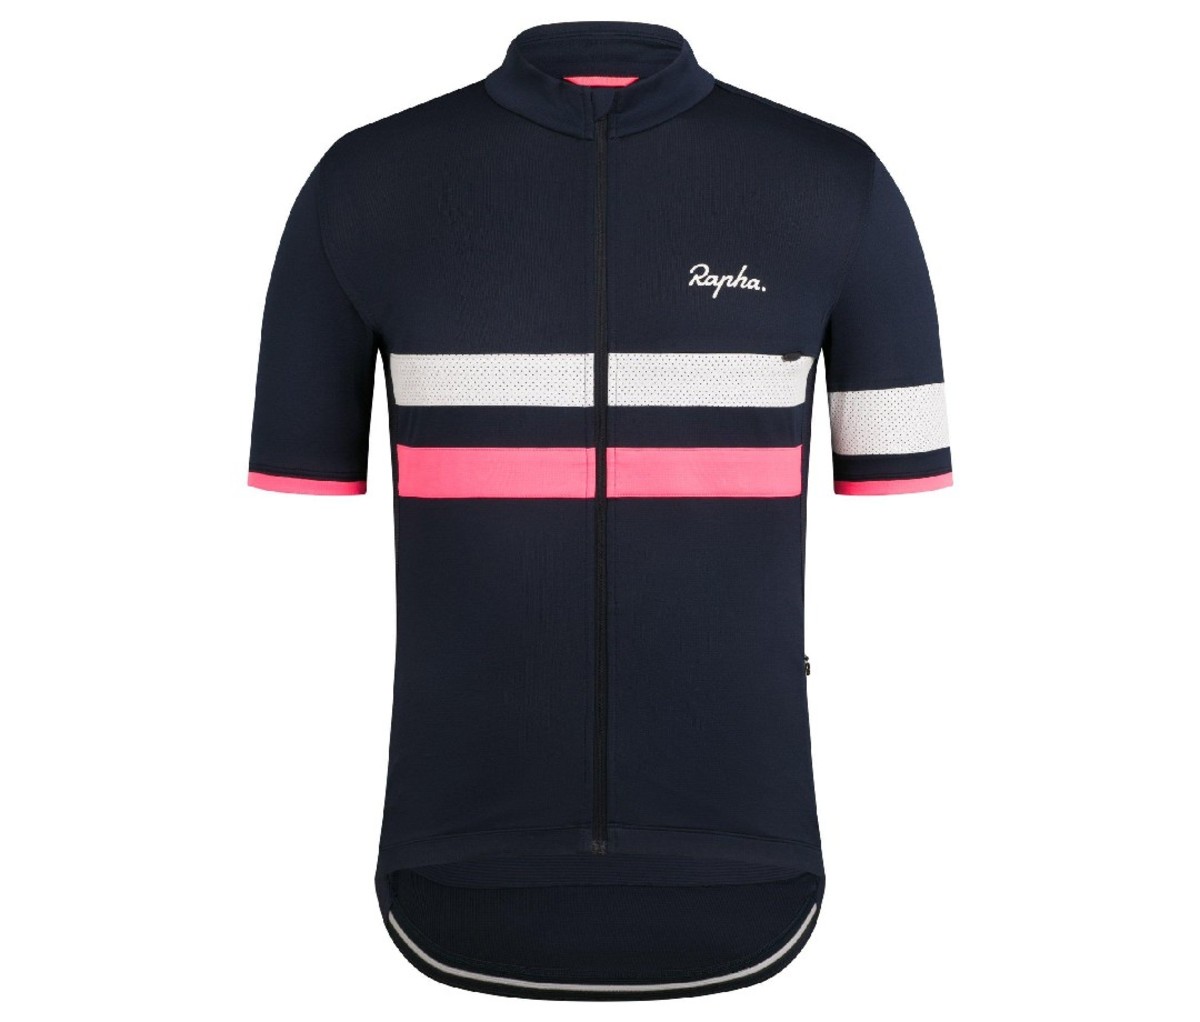 An image of a navy Rapha Brevet Lightweight Jersey with white and pink stripes.